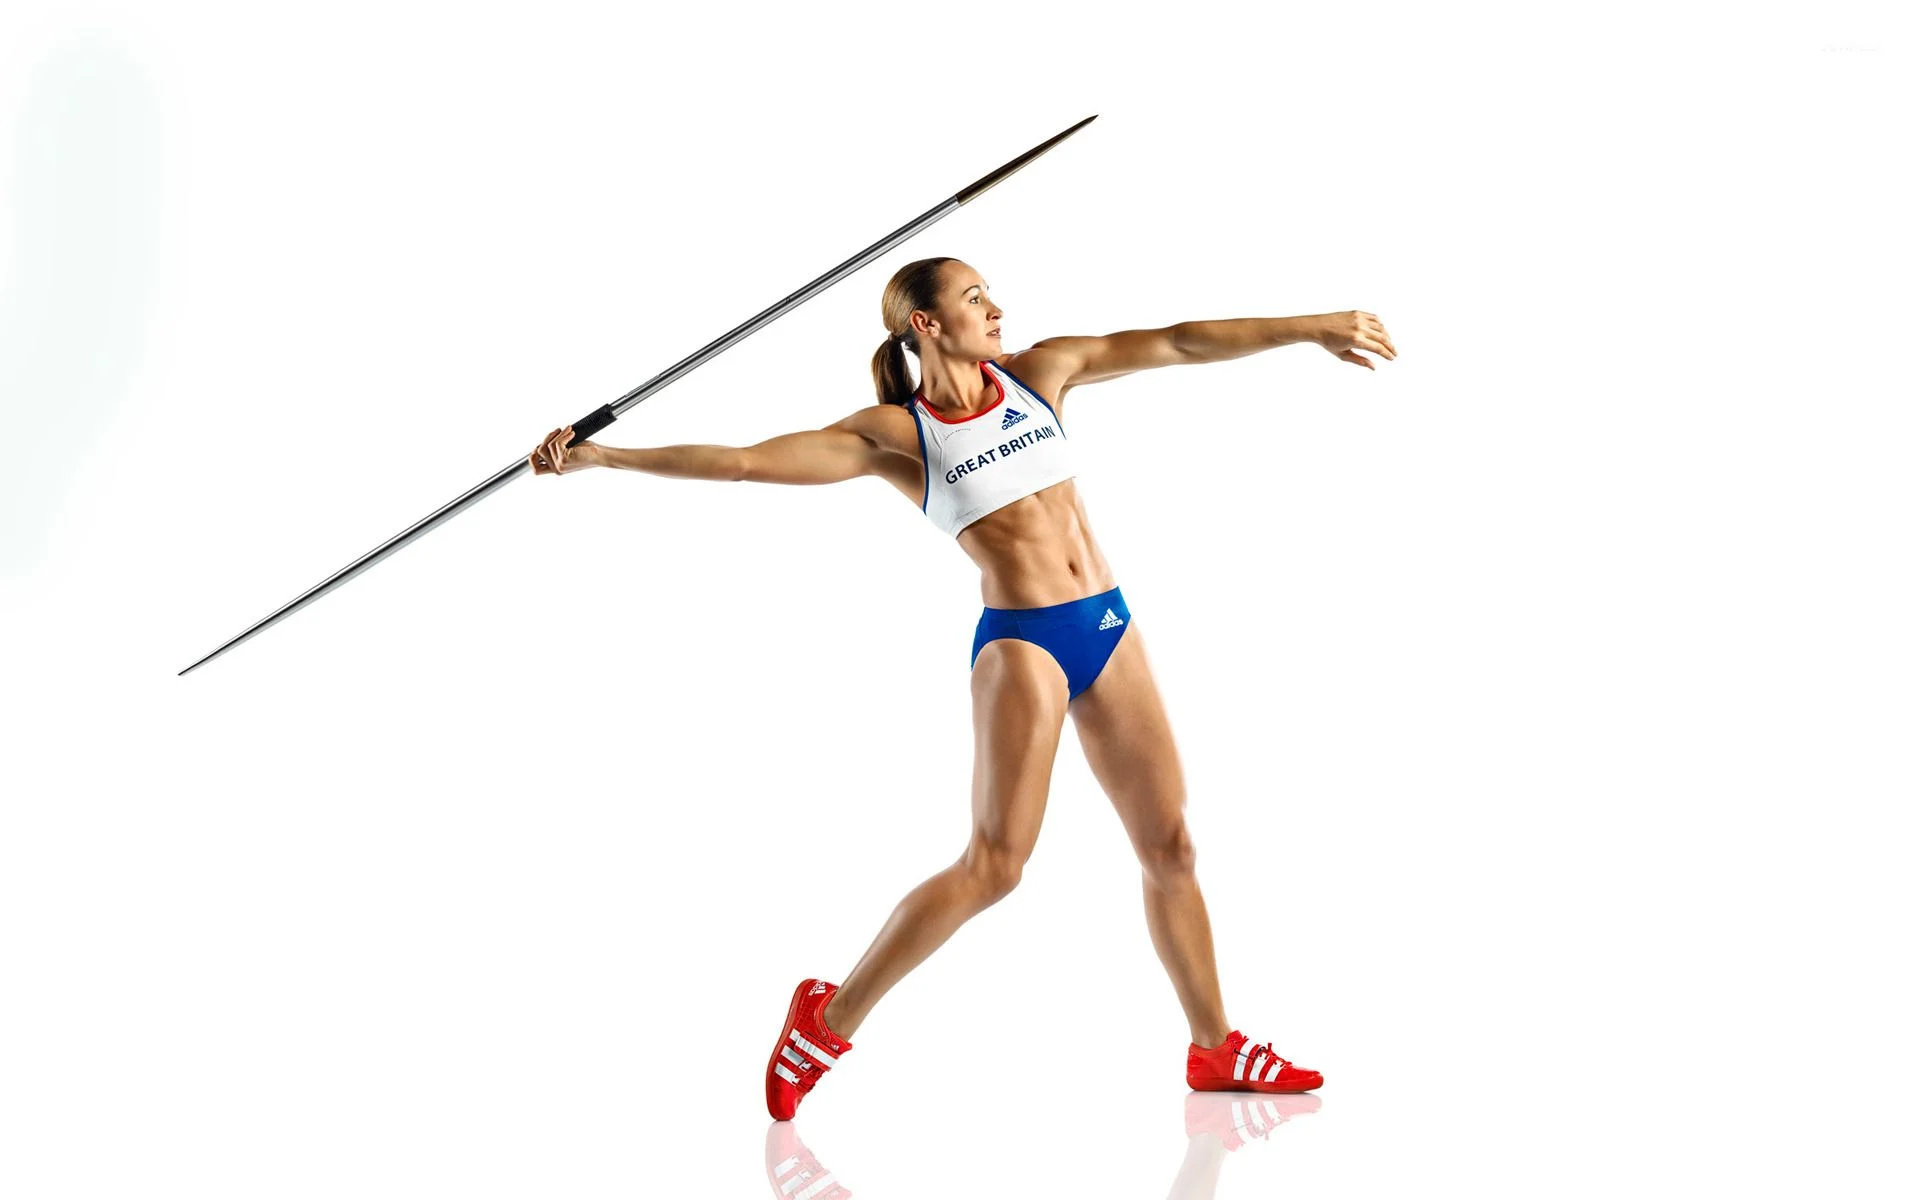 Javelin Throw: Great Britain, Jessica Ennis, A track and field event where a spear is tossed. 1920x1200 HD Wallpaper.